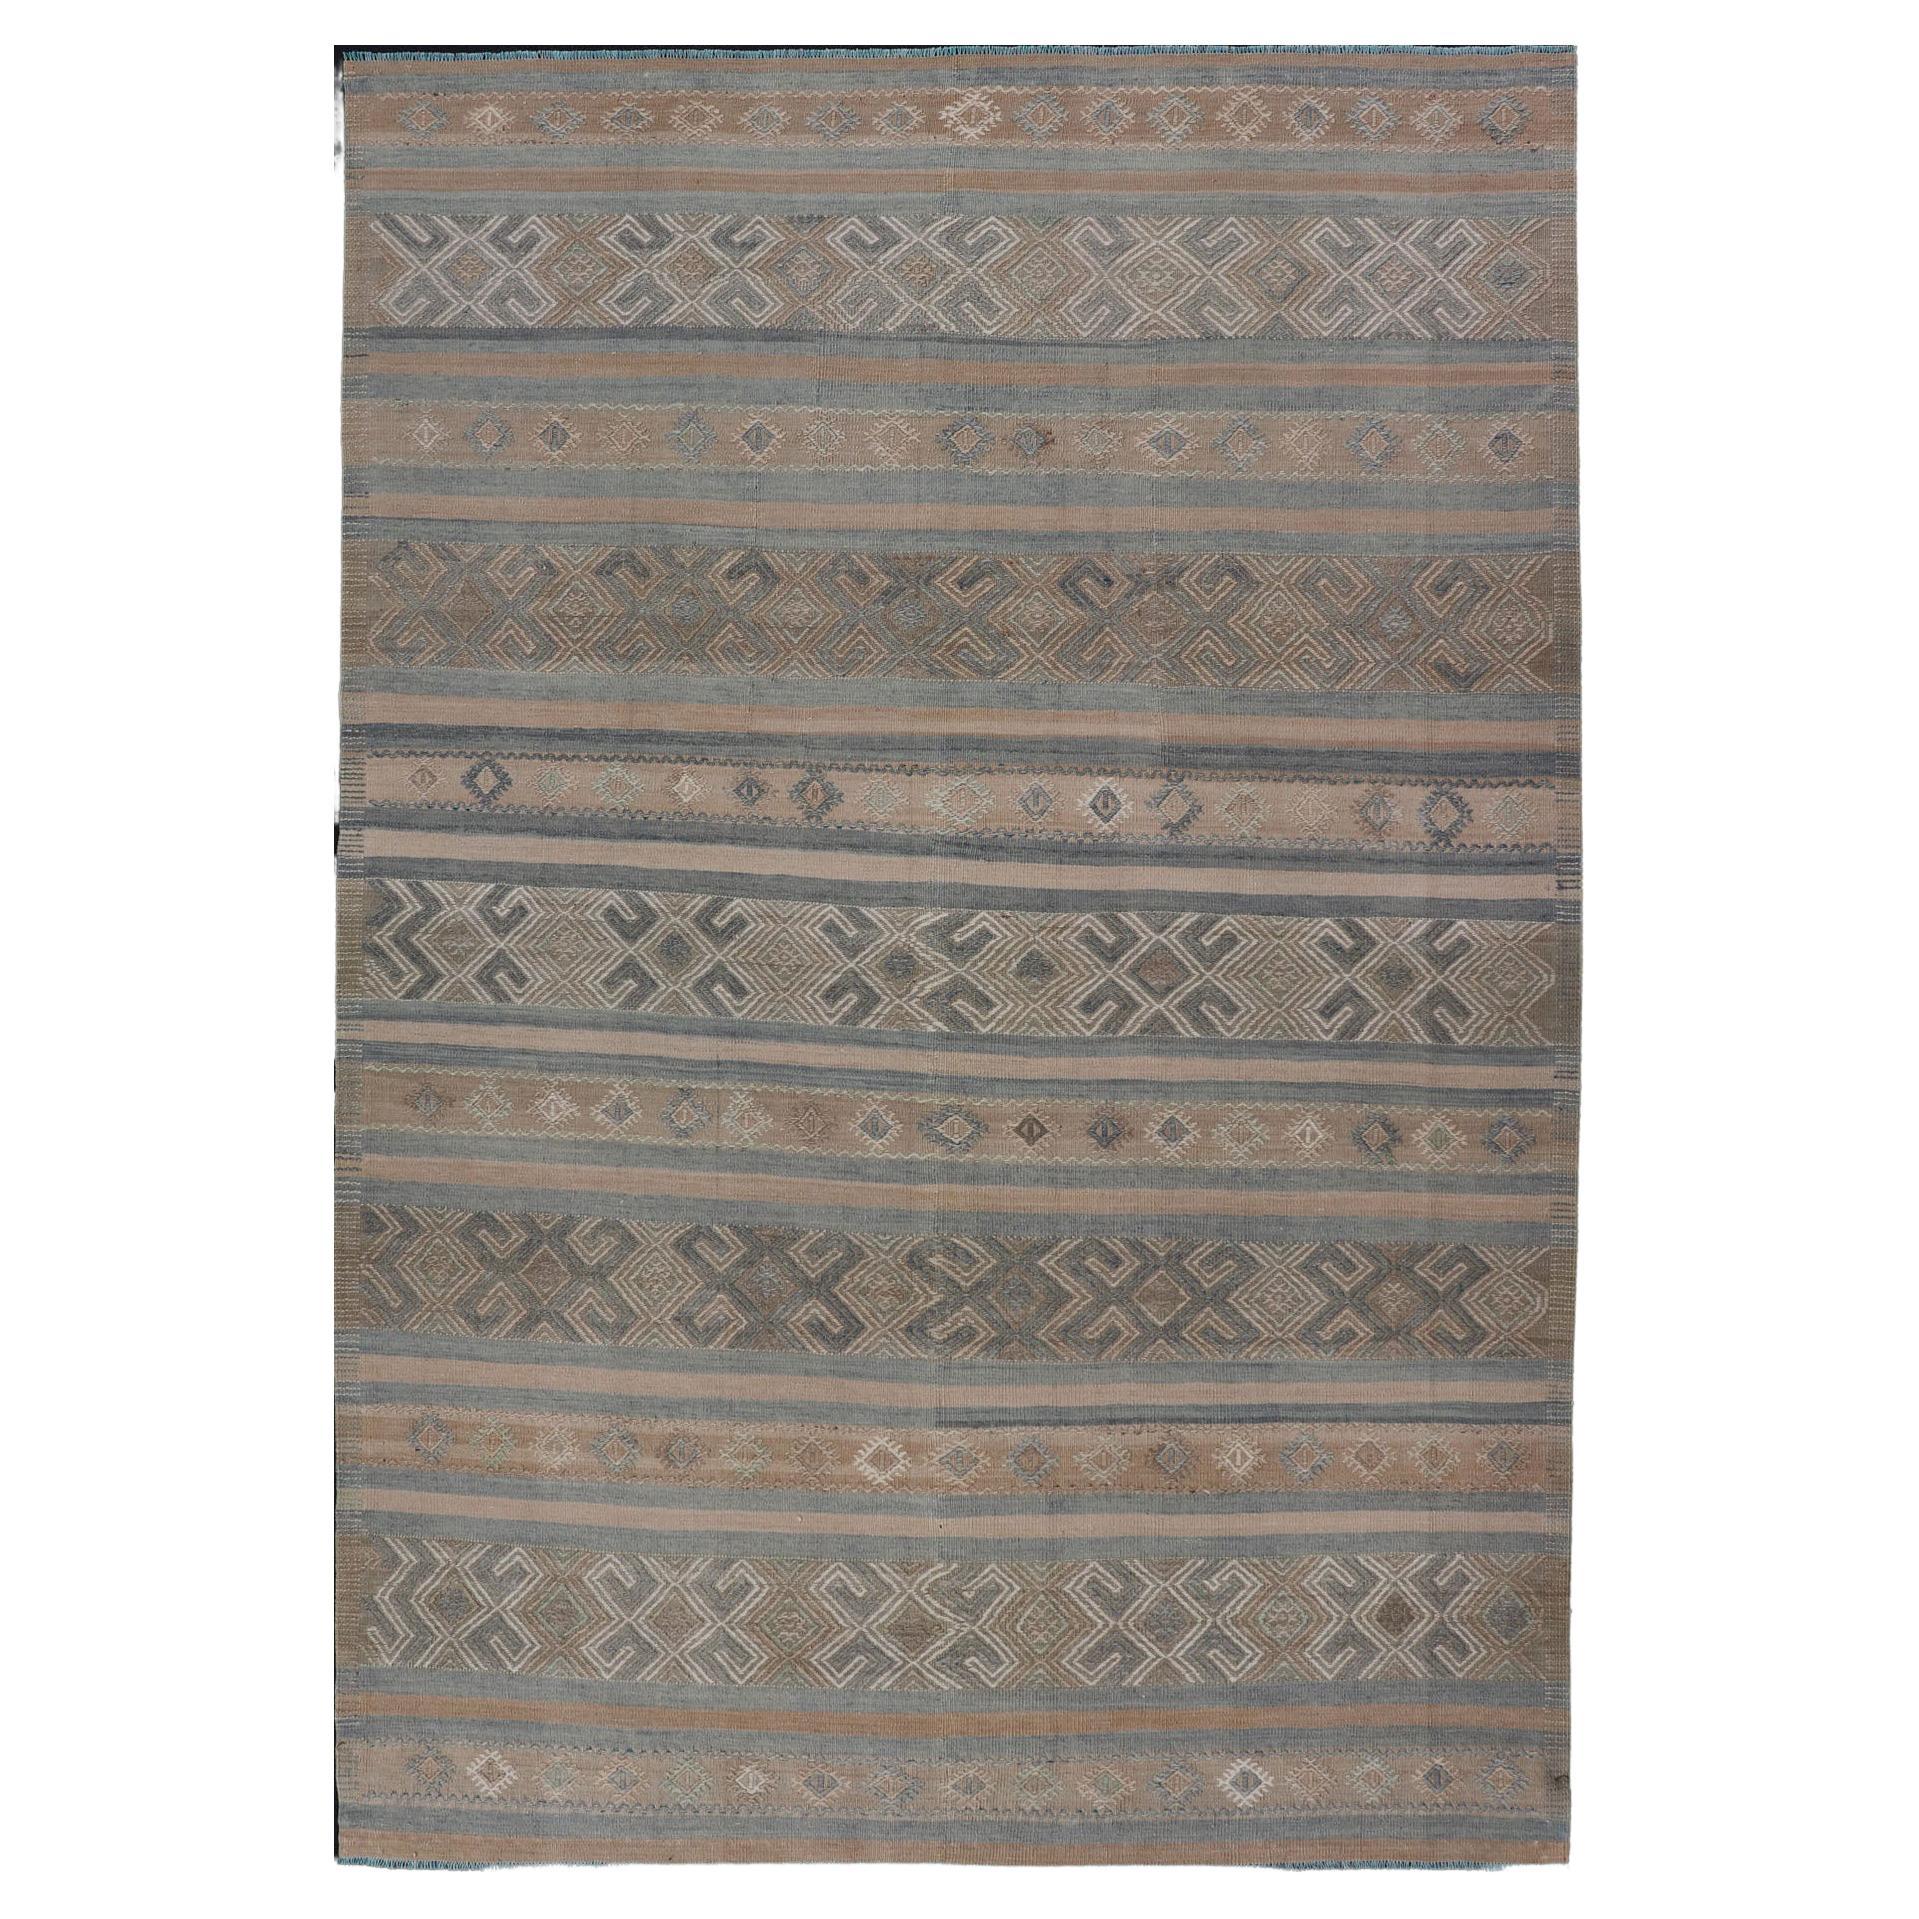 Vintage Turkish Kilim Rug with Horizontal Stripes in Taupe and Neutral Colors For Sale